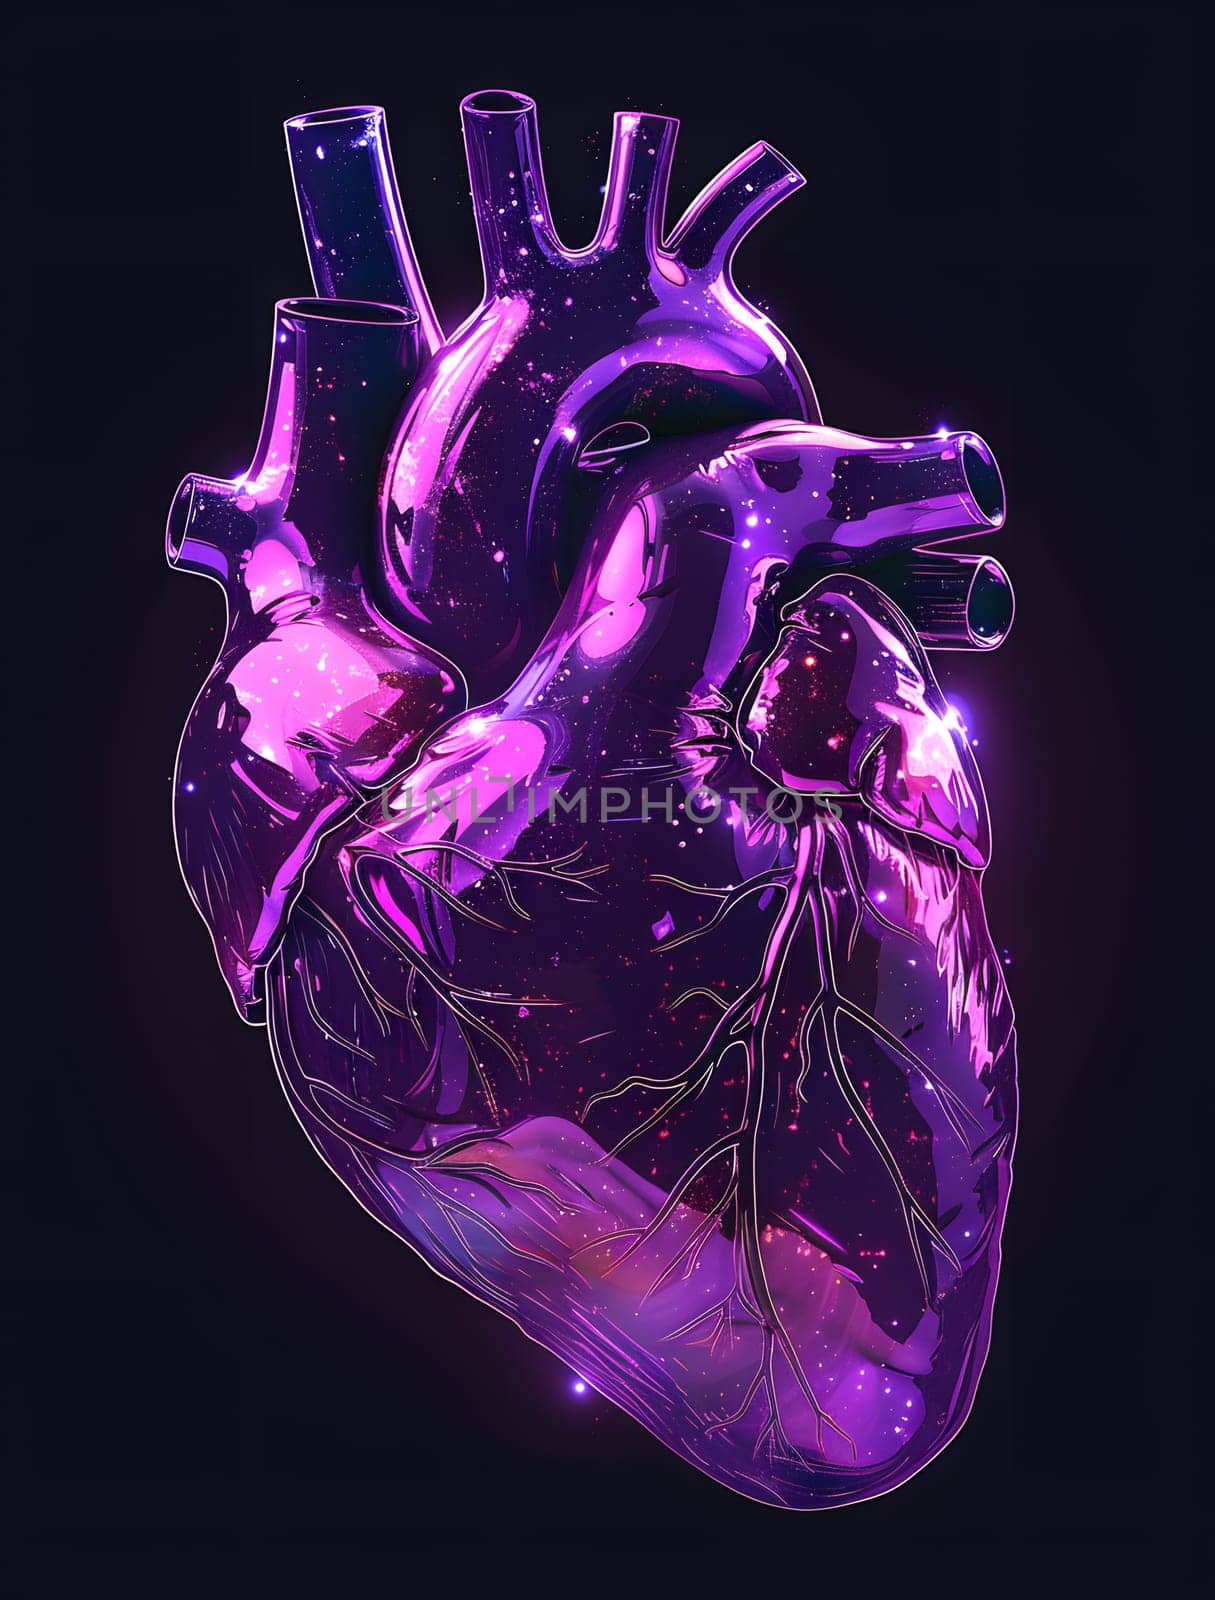 A violet heart shines in the darkness against a black background by Nadtochiy